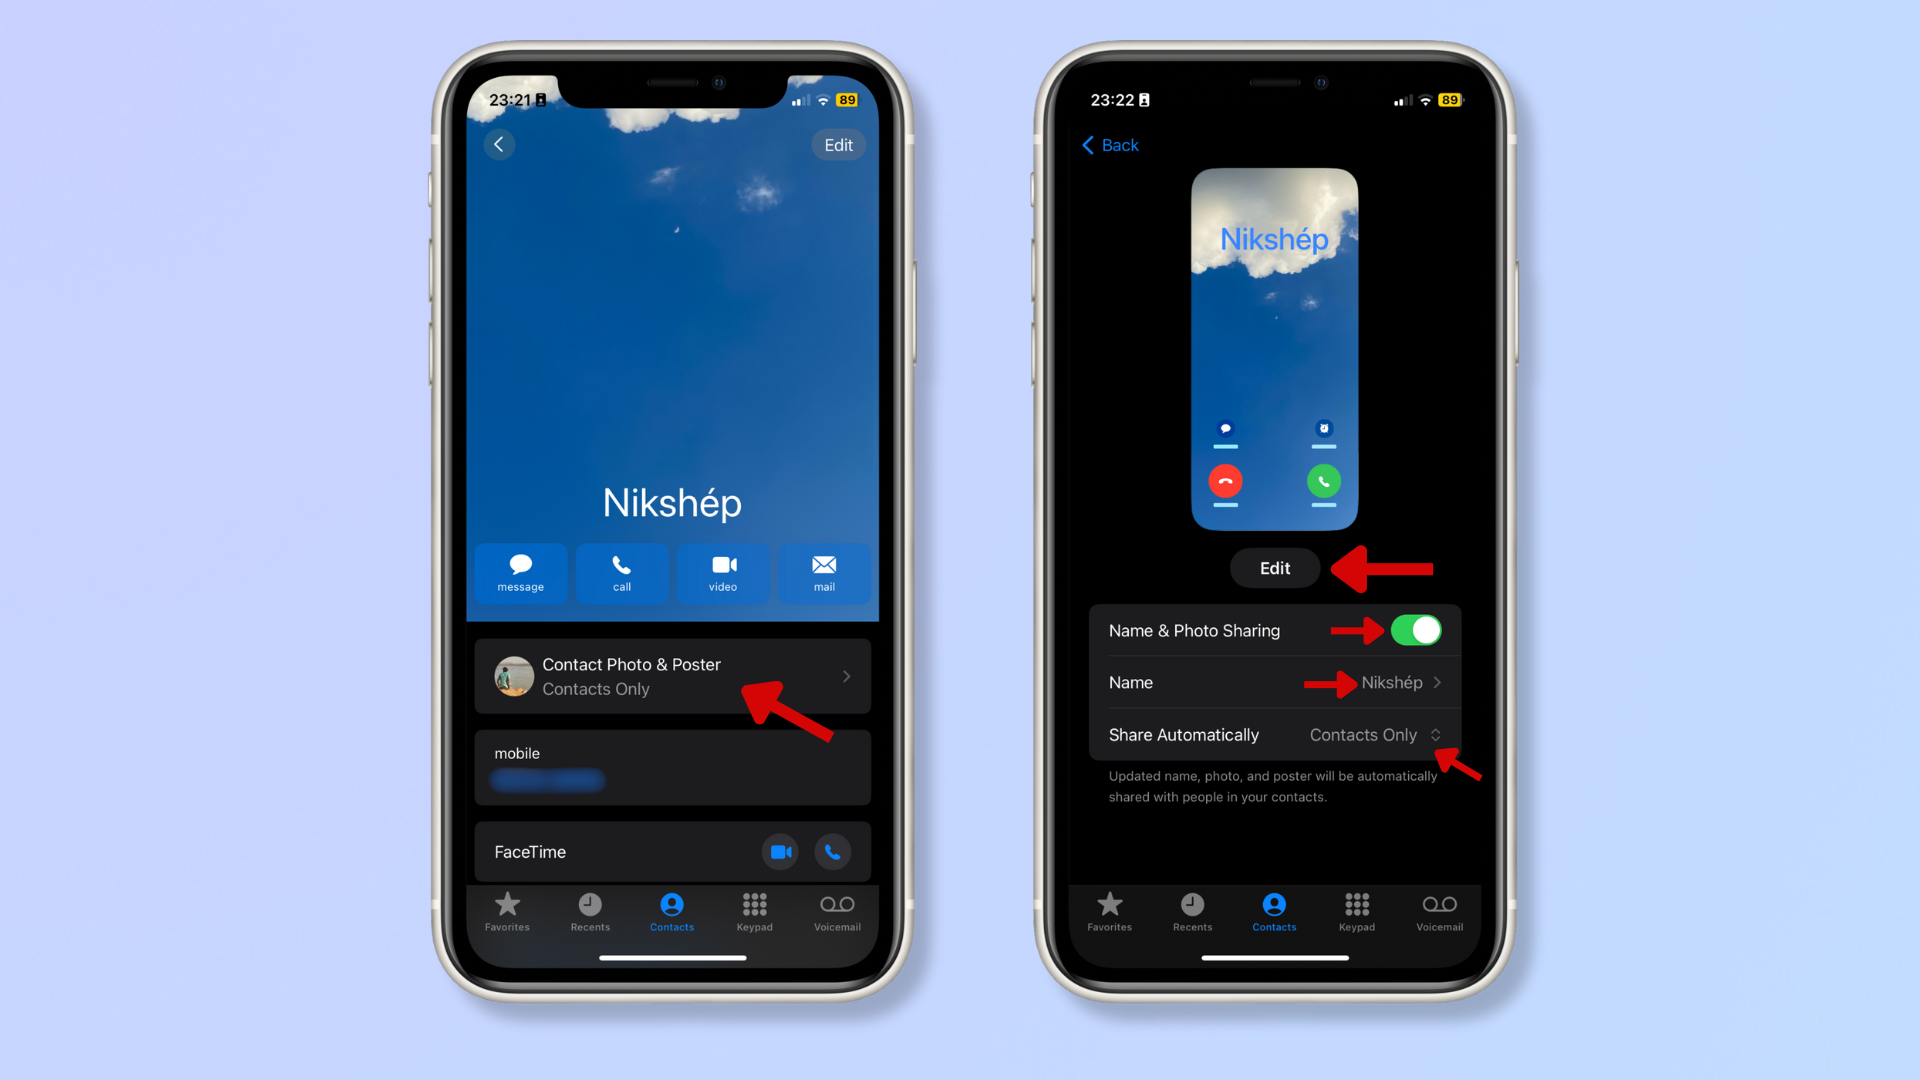 The first screenshot shows the Contact Card on iPhone with a red arrow pointing at Contact Photo & Poster. The second screenshot shows the Contact Card menu with red arrows pointing at Edit, Name & Photo Sharing, Name, and Share Automatically. 